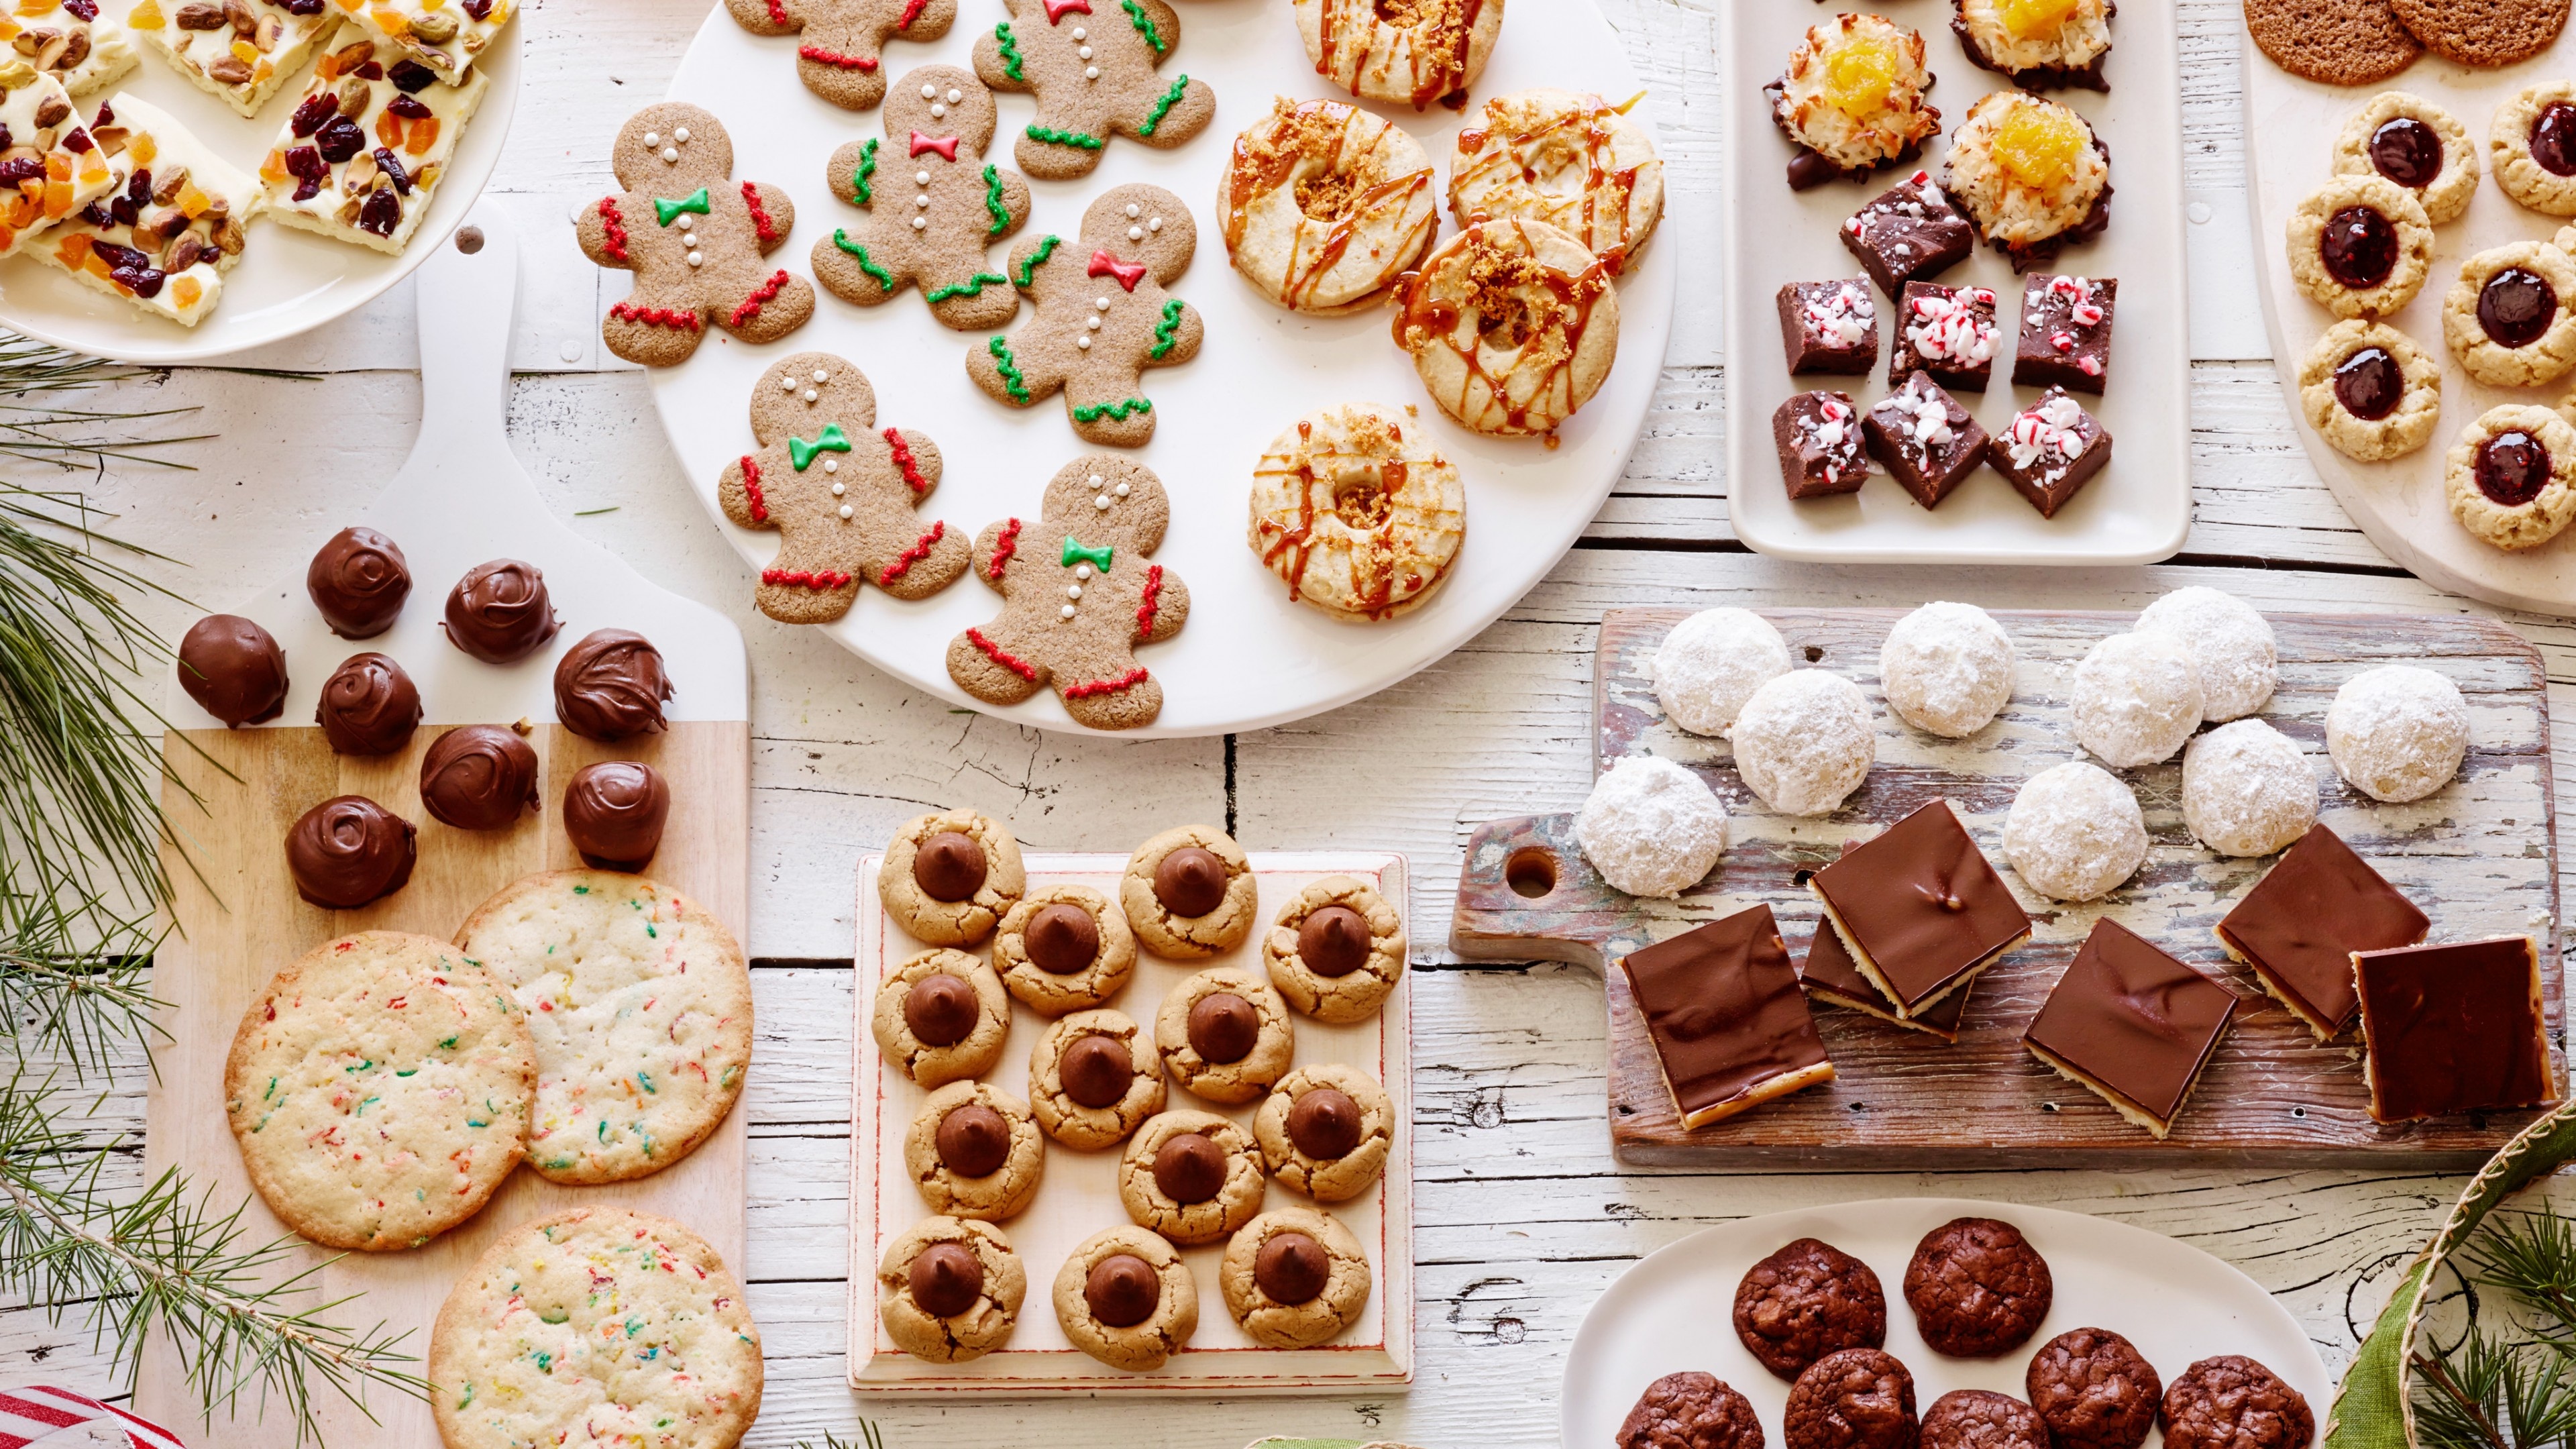 Gingerbread Man, Festive cookie plate, Holiday desserts, Sweet and savory, 3840x2160 4K Desktop